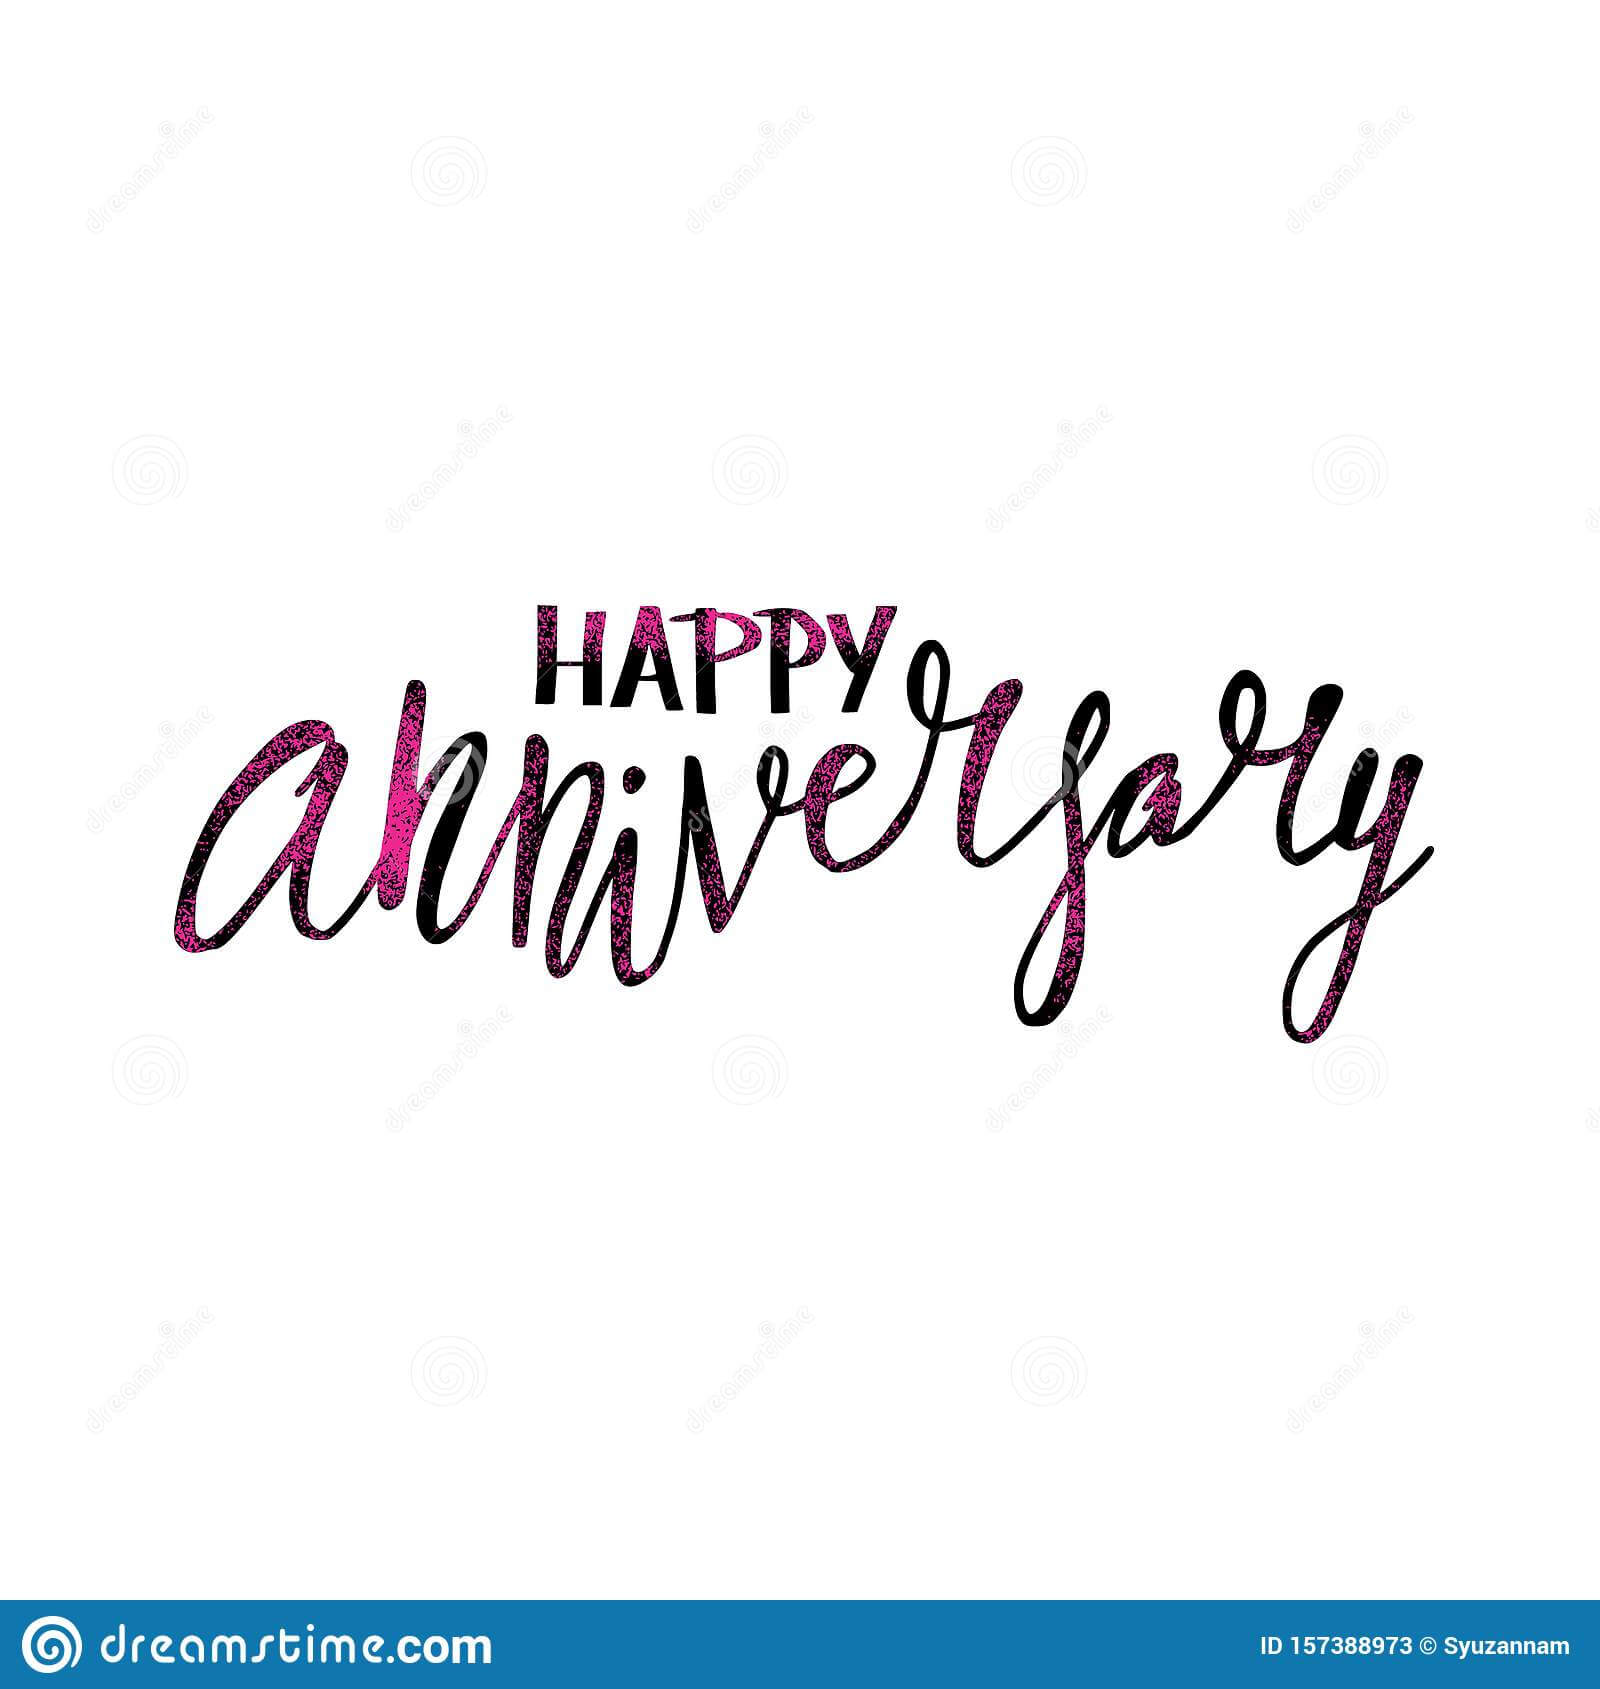 Happy Anniversary Text. Vector Word With Decor Stock Vector Throughout Anniversary Card Template Word